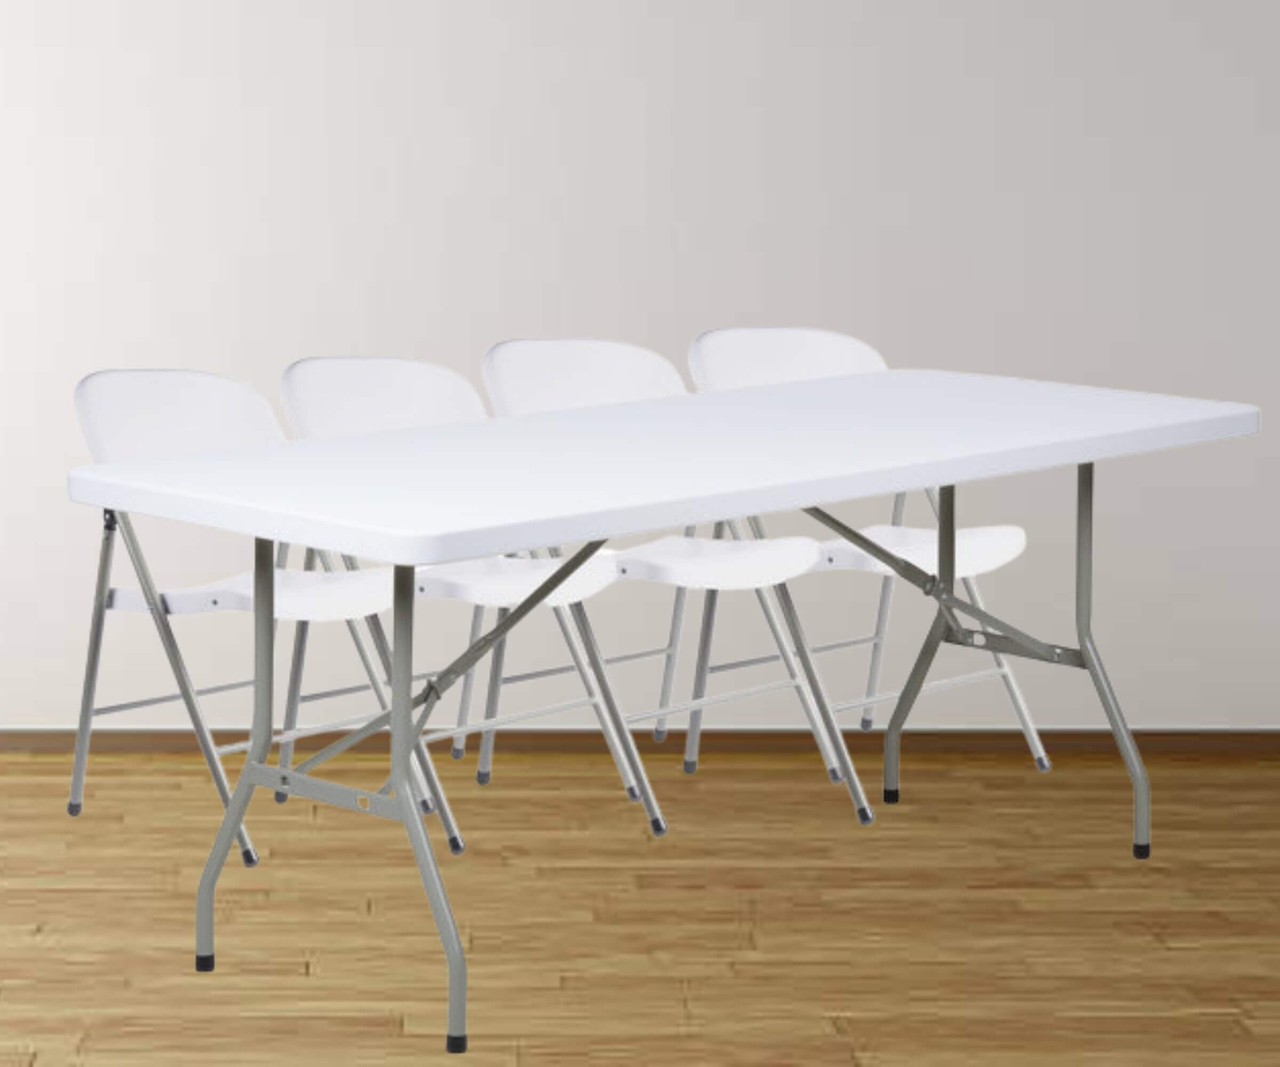 CP Granite White Heavy-Duty Blow Molded Plastic Folding Table with 4 White Folding Chairs 30" x 72"| Functional Seating Solution for Various Occasions- Chicken Pieces